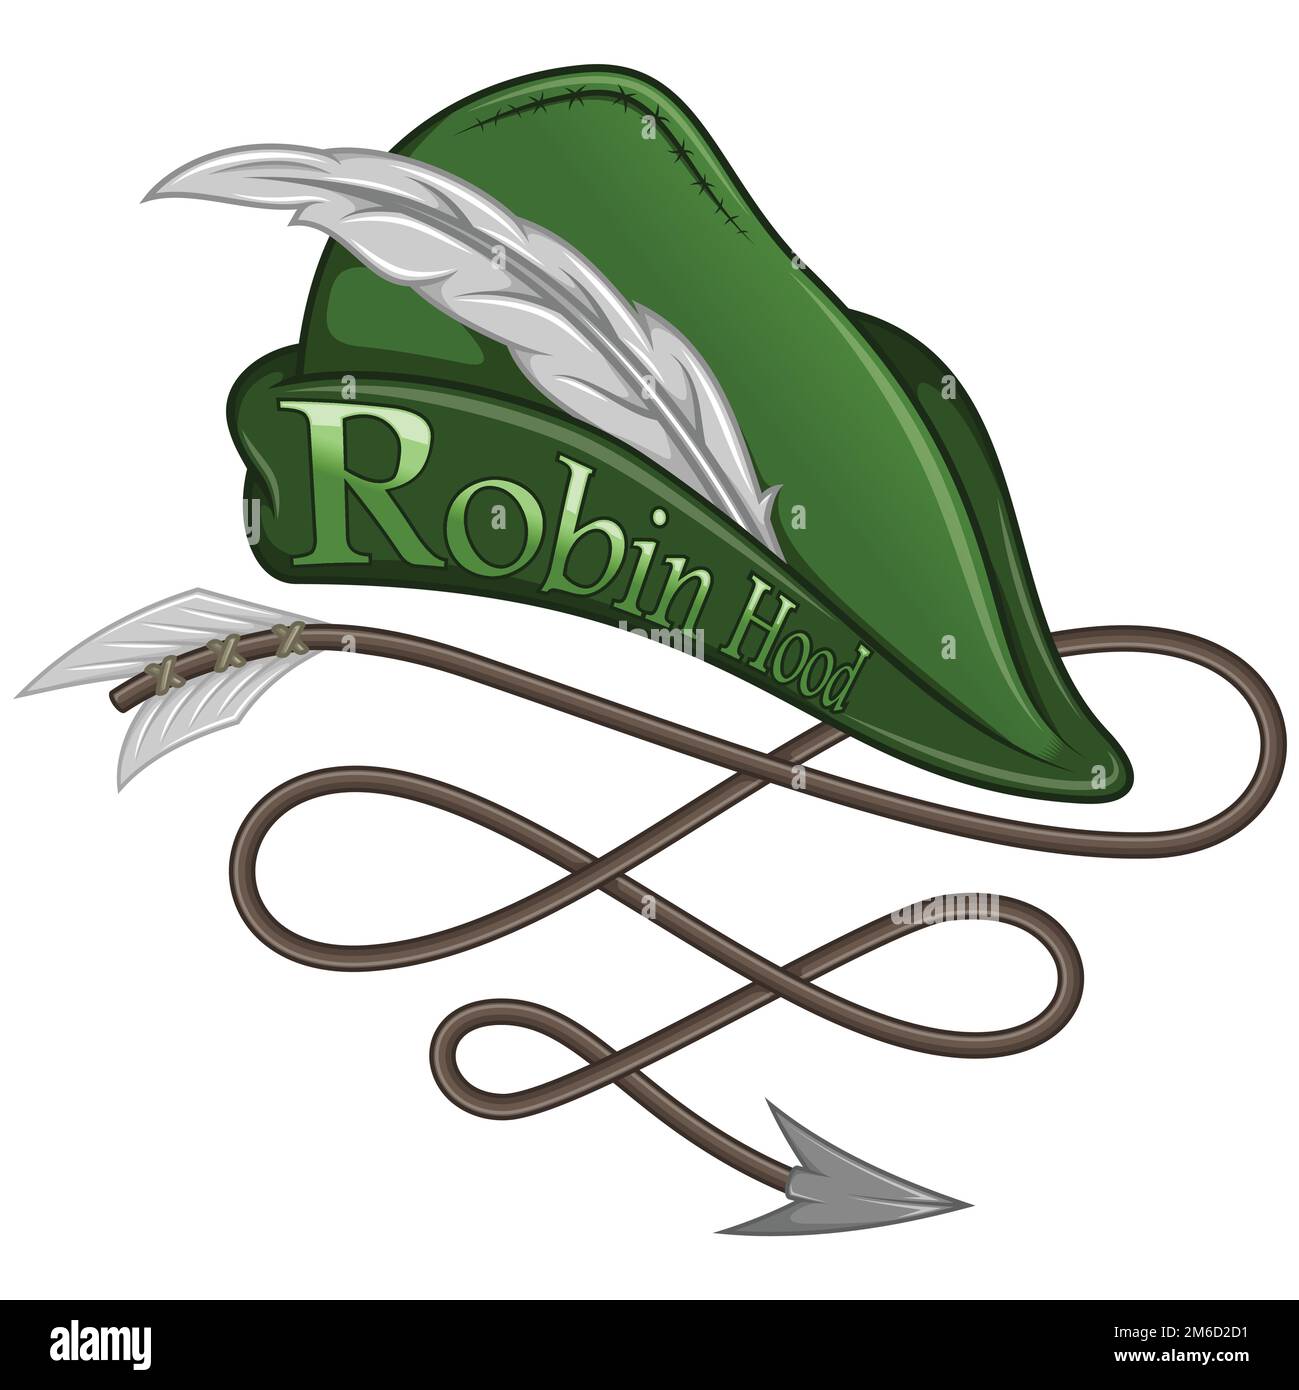 Vector design of Medieval Archer Hat with feathers, illustration of Robin Hood hat with curved arrows Stock Vector